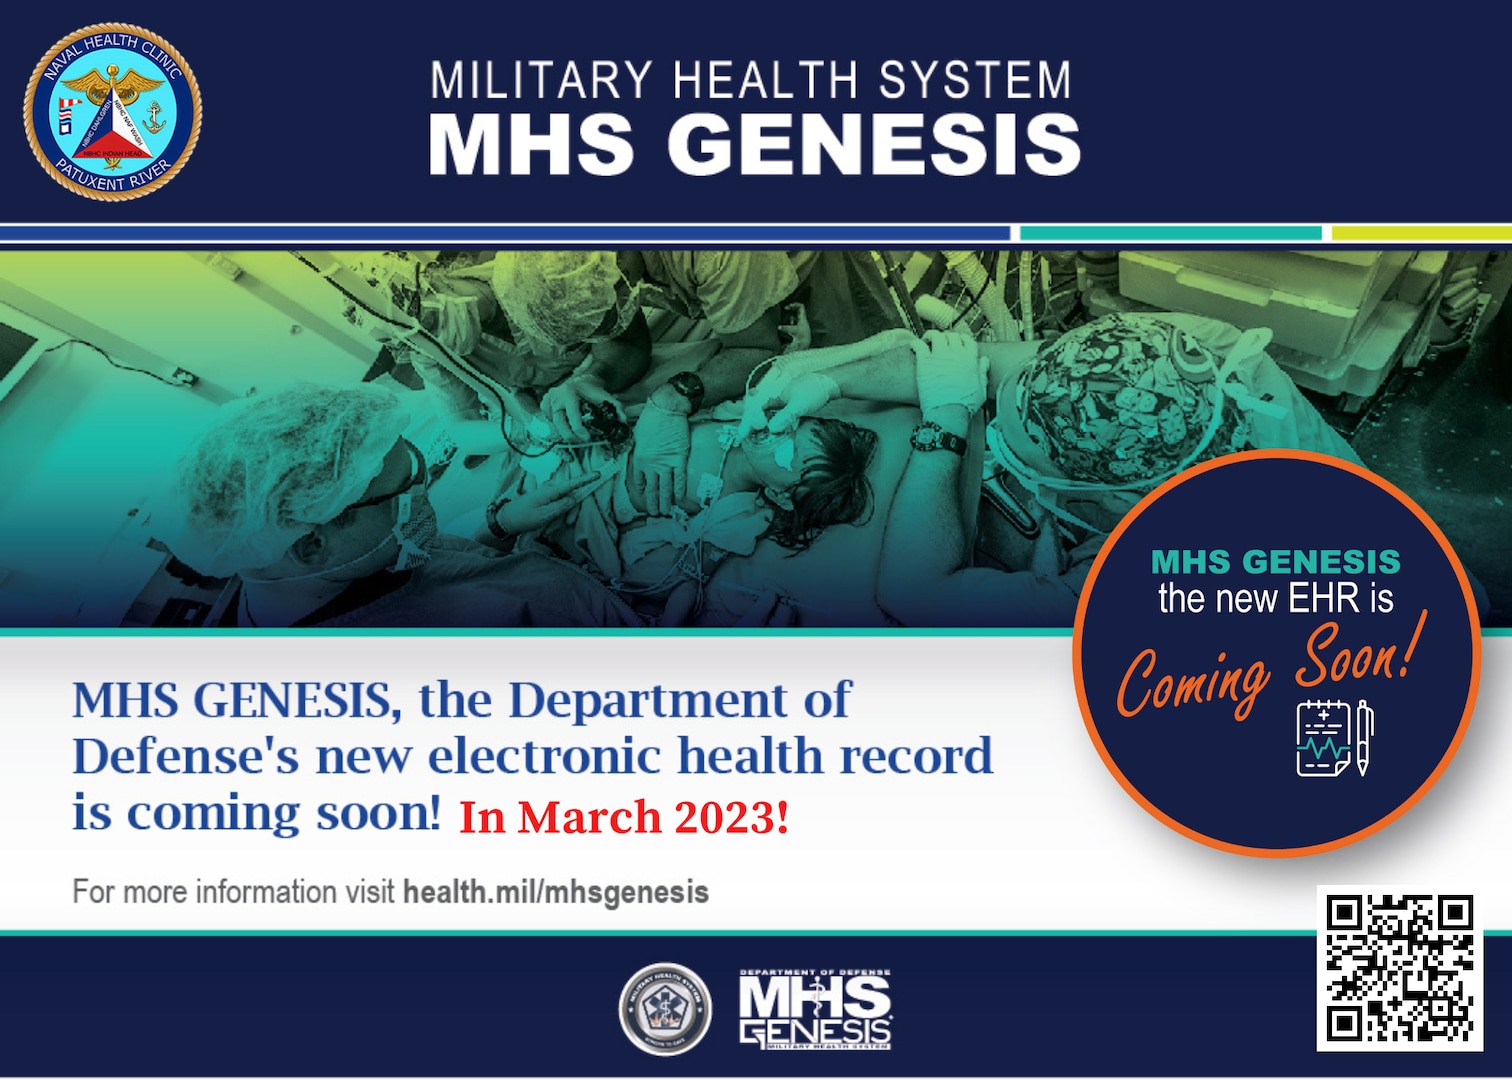 Graphic with a photo of doctors caring for a pediatric patient and text: "MHS GENESIS, the Department of Defense's new electronic health record is coming soon! In March 2023!"